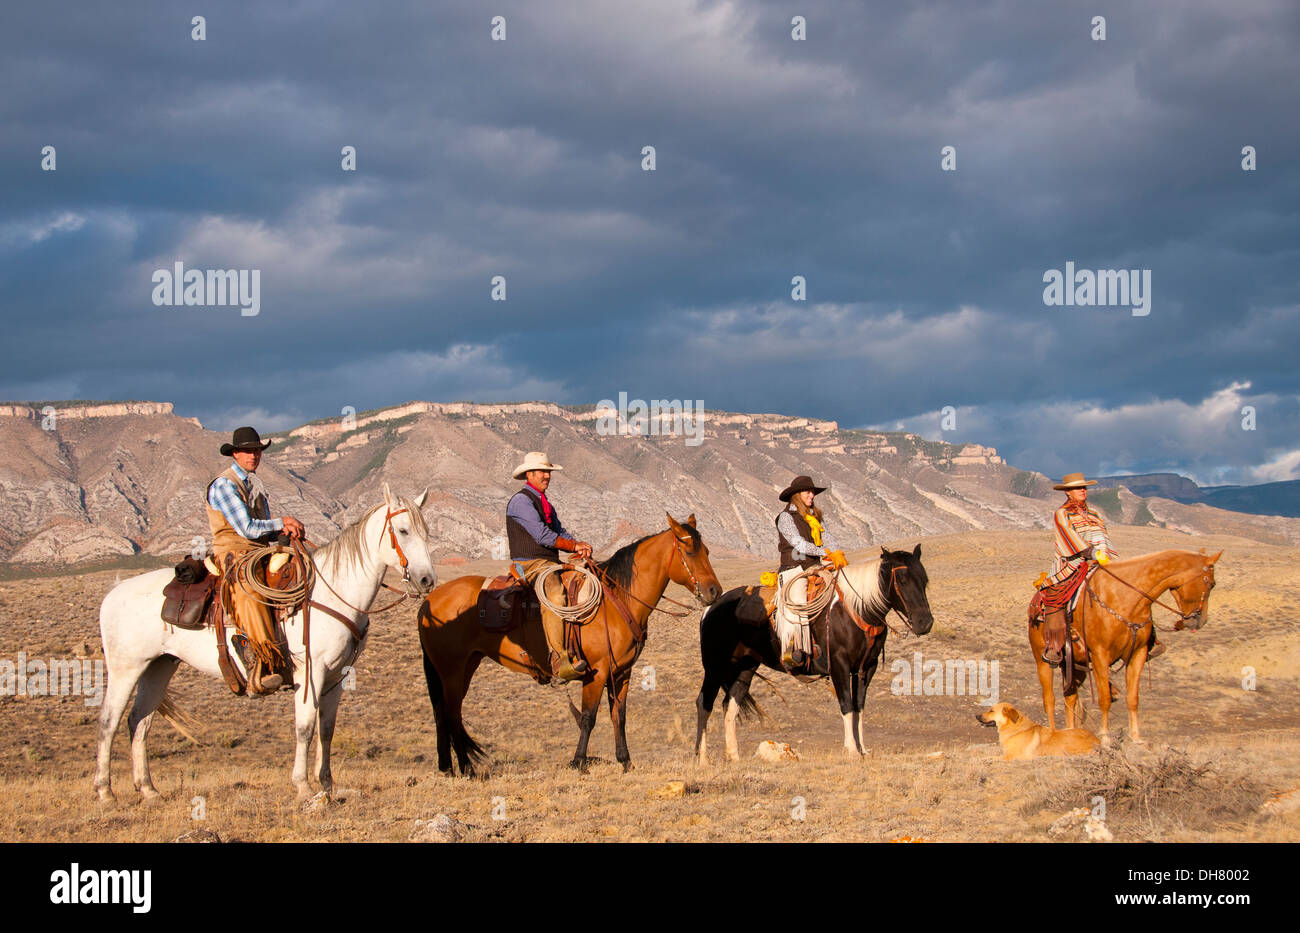 Cowboys and Cowgirls on horseback in the Bighorn Mountains of Wyoming Stock Photo